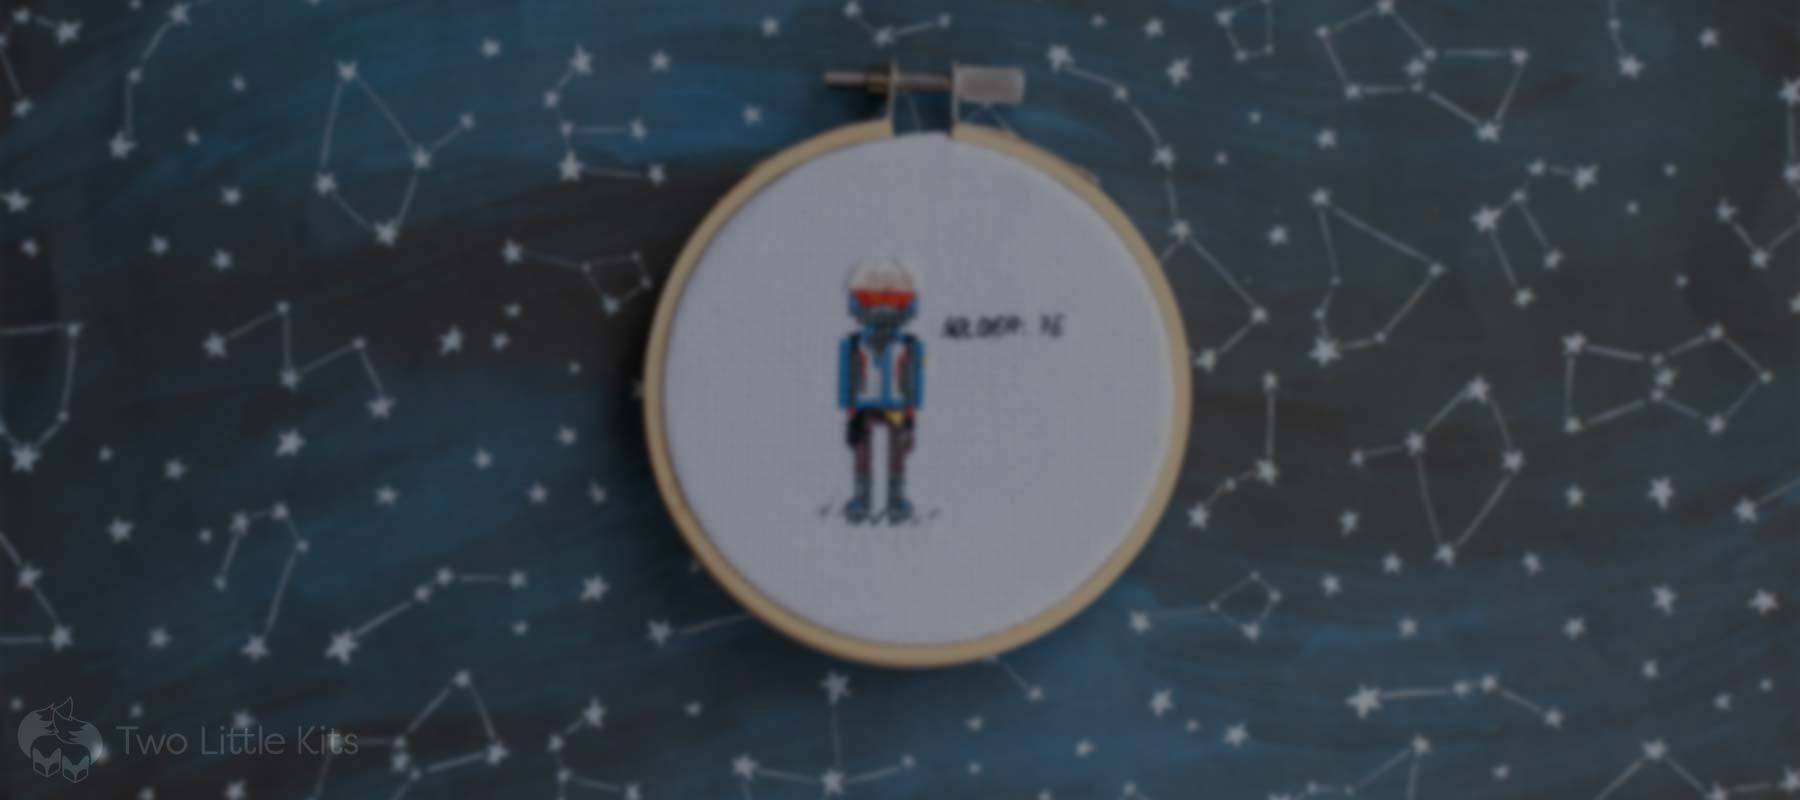 Soldier: 76 is out now and ready to stitch!